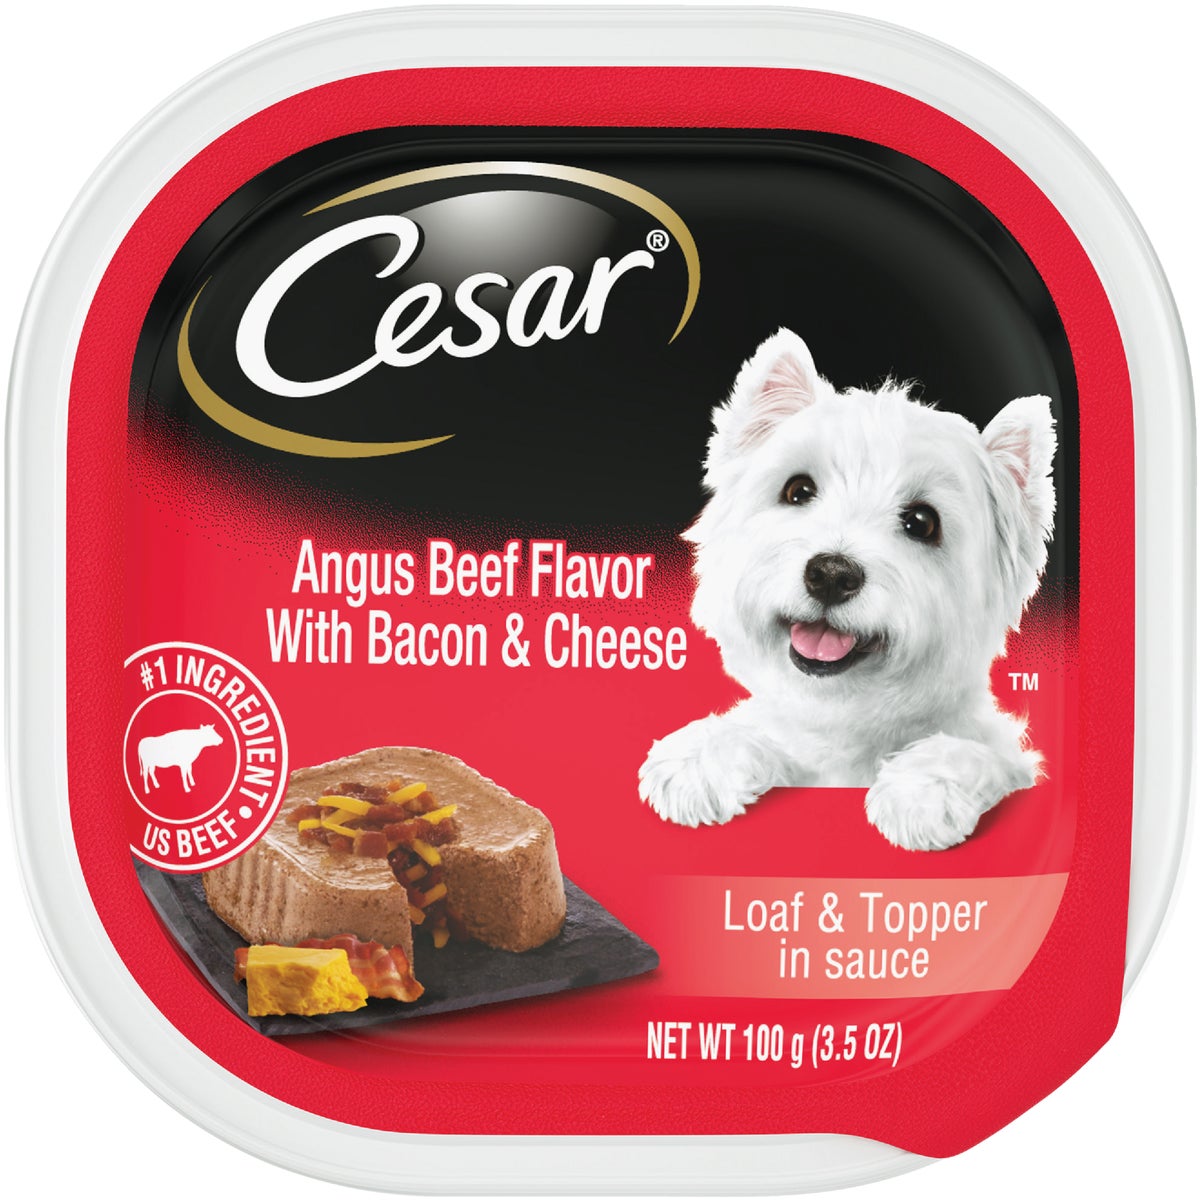 Cesar Loaf & Topper Angus Beef with Bacon & Cheese Adult Wet Dog Food, 3.5 Oz.